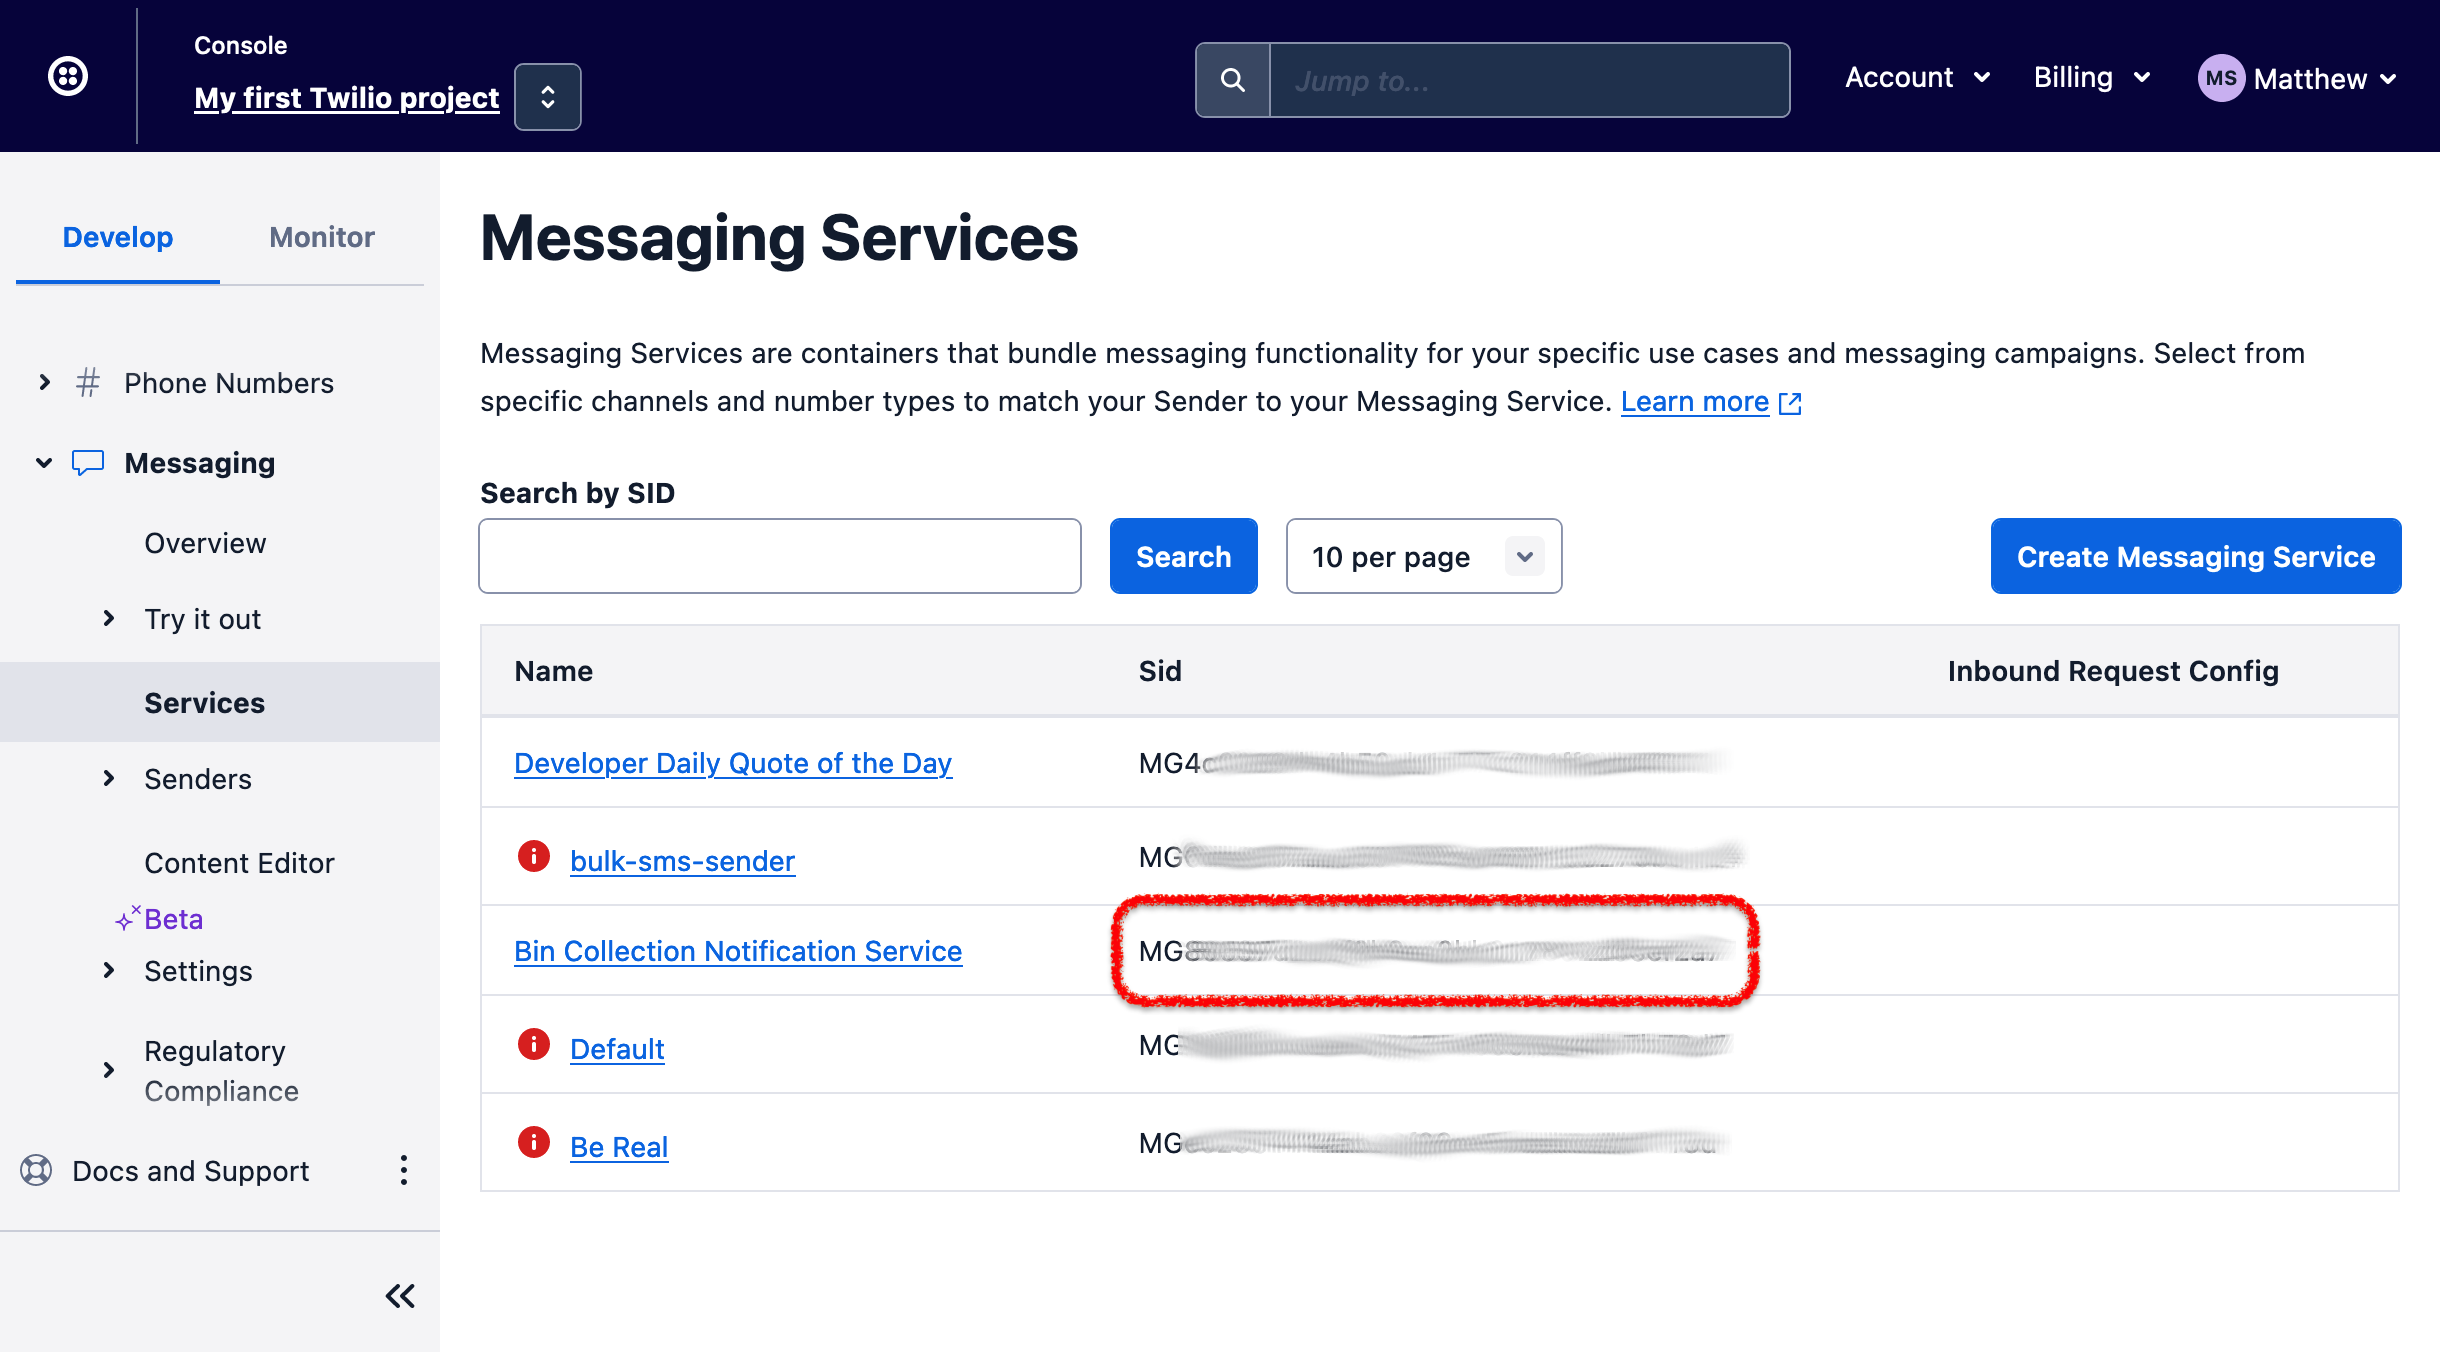 The list of Messaging Services available for an account, viewed via the Twilio Console.